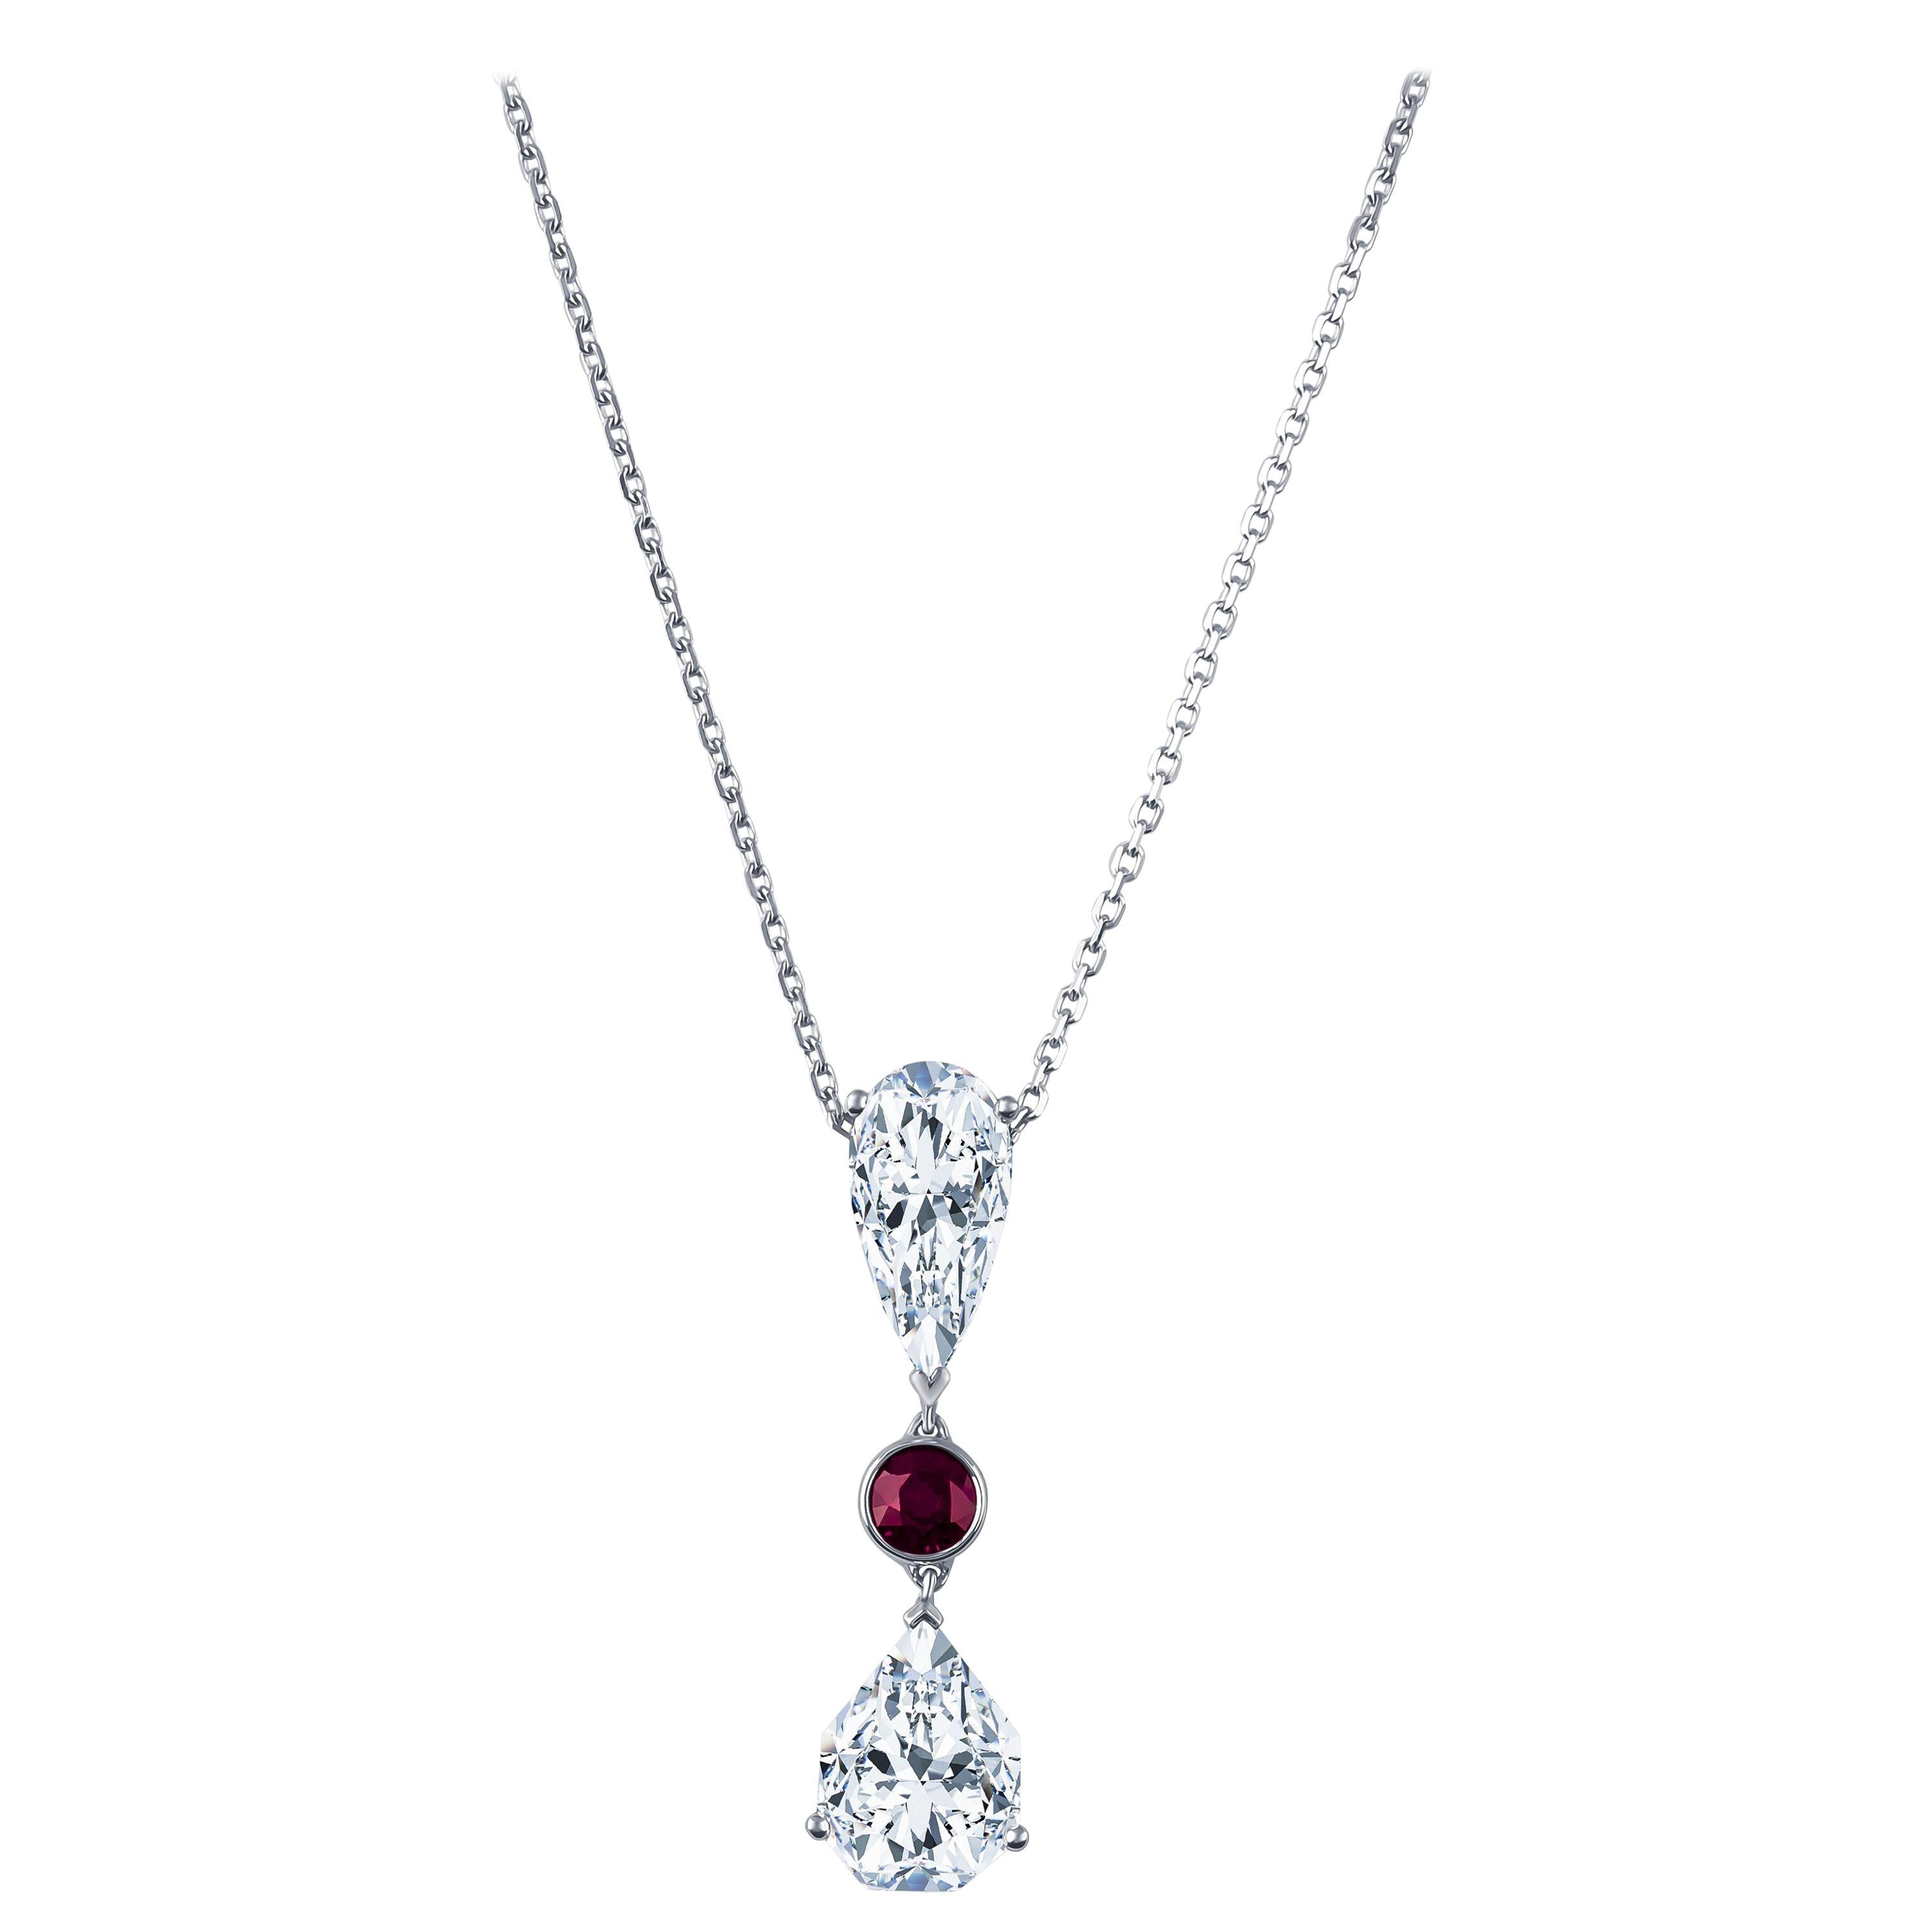 Two Rose Cut Diamonds 1.91 Carat Total with 0.39 Carat Round Ruby Necklace